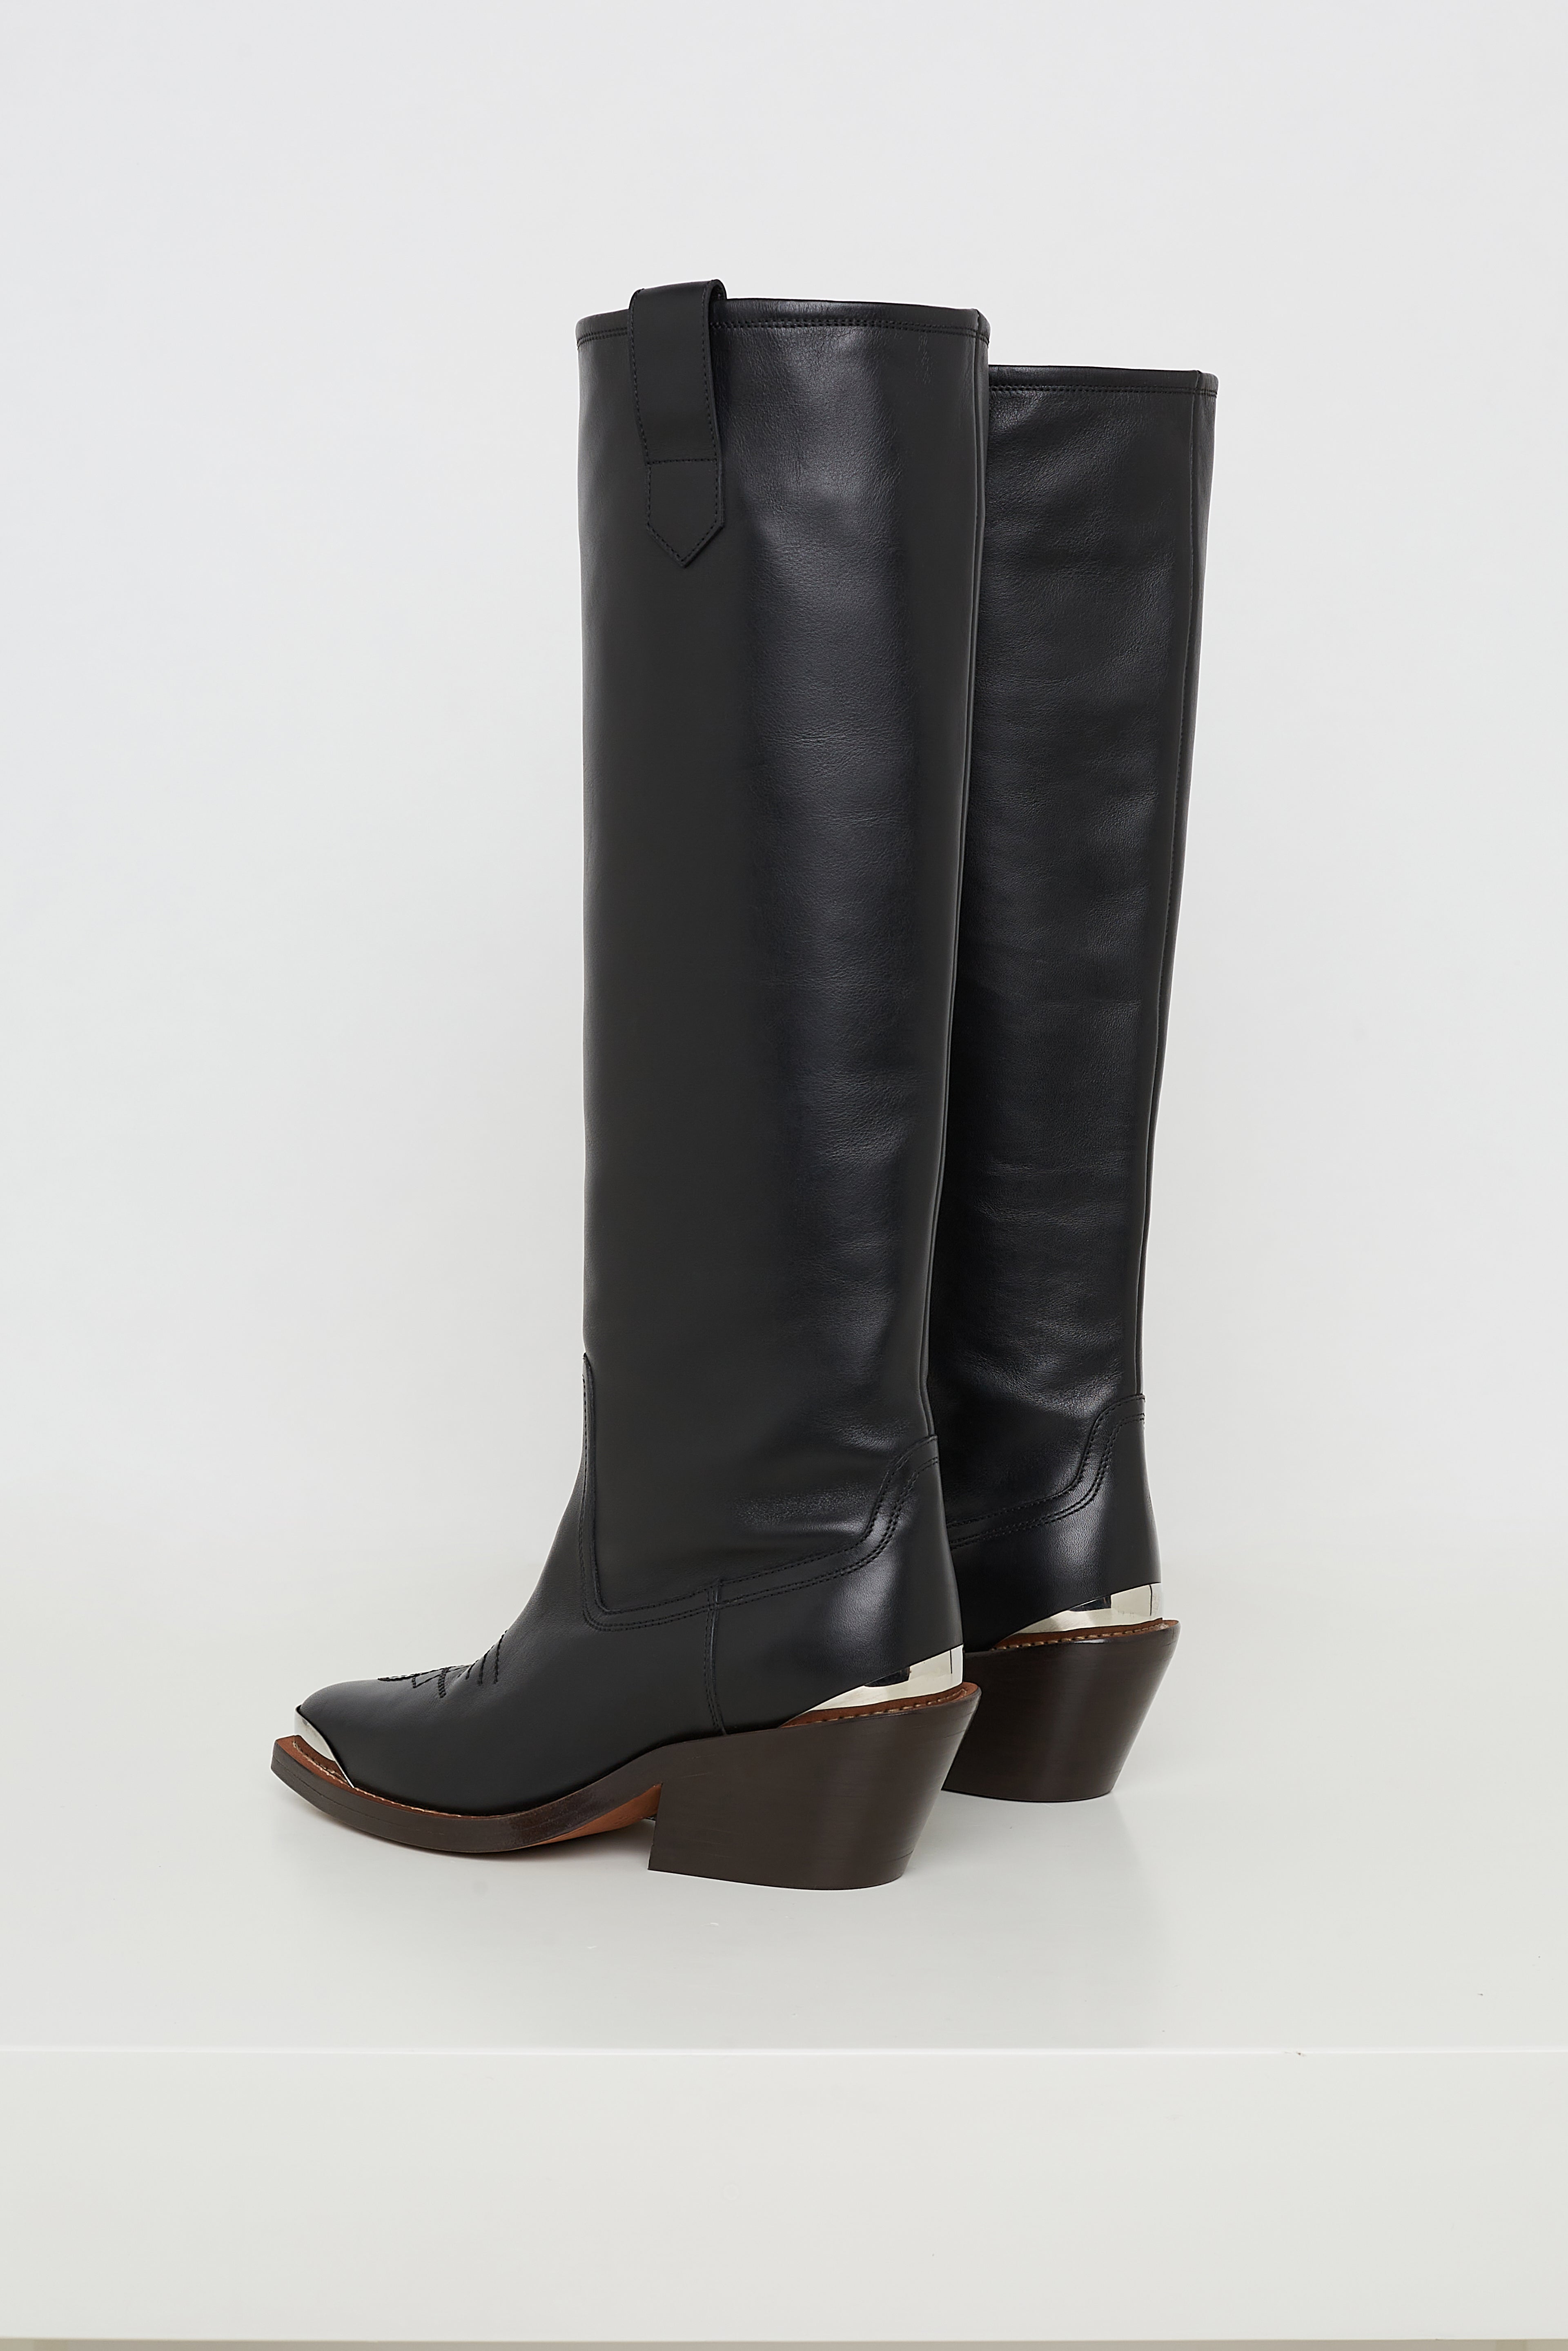 Dorothee-Schumacher-OUTLET-SALE-WESTERN-SUMMER-Tall-Boot-Stiefel-Stiefeletten-ARCHIVE-COLLECTION-3_523f178e-32c6-4245-81a0-d7a279fd6ddf.jpg